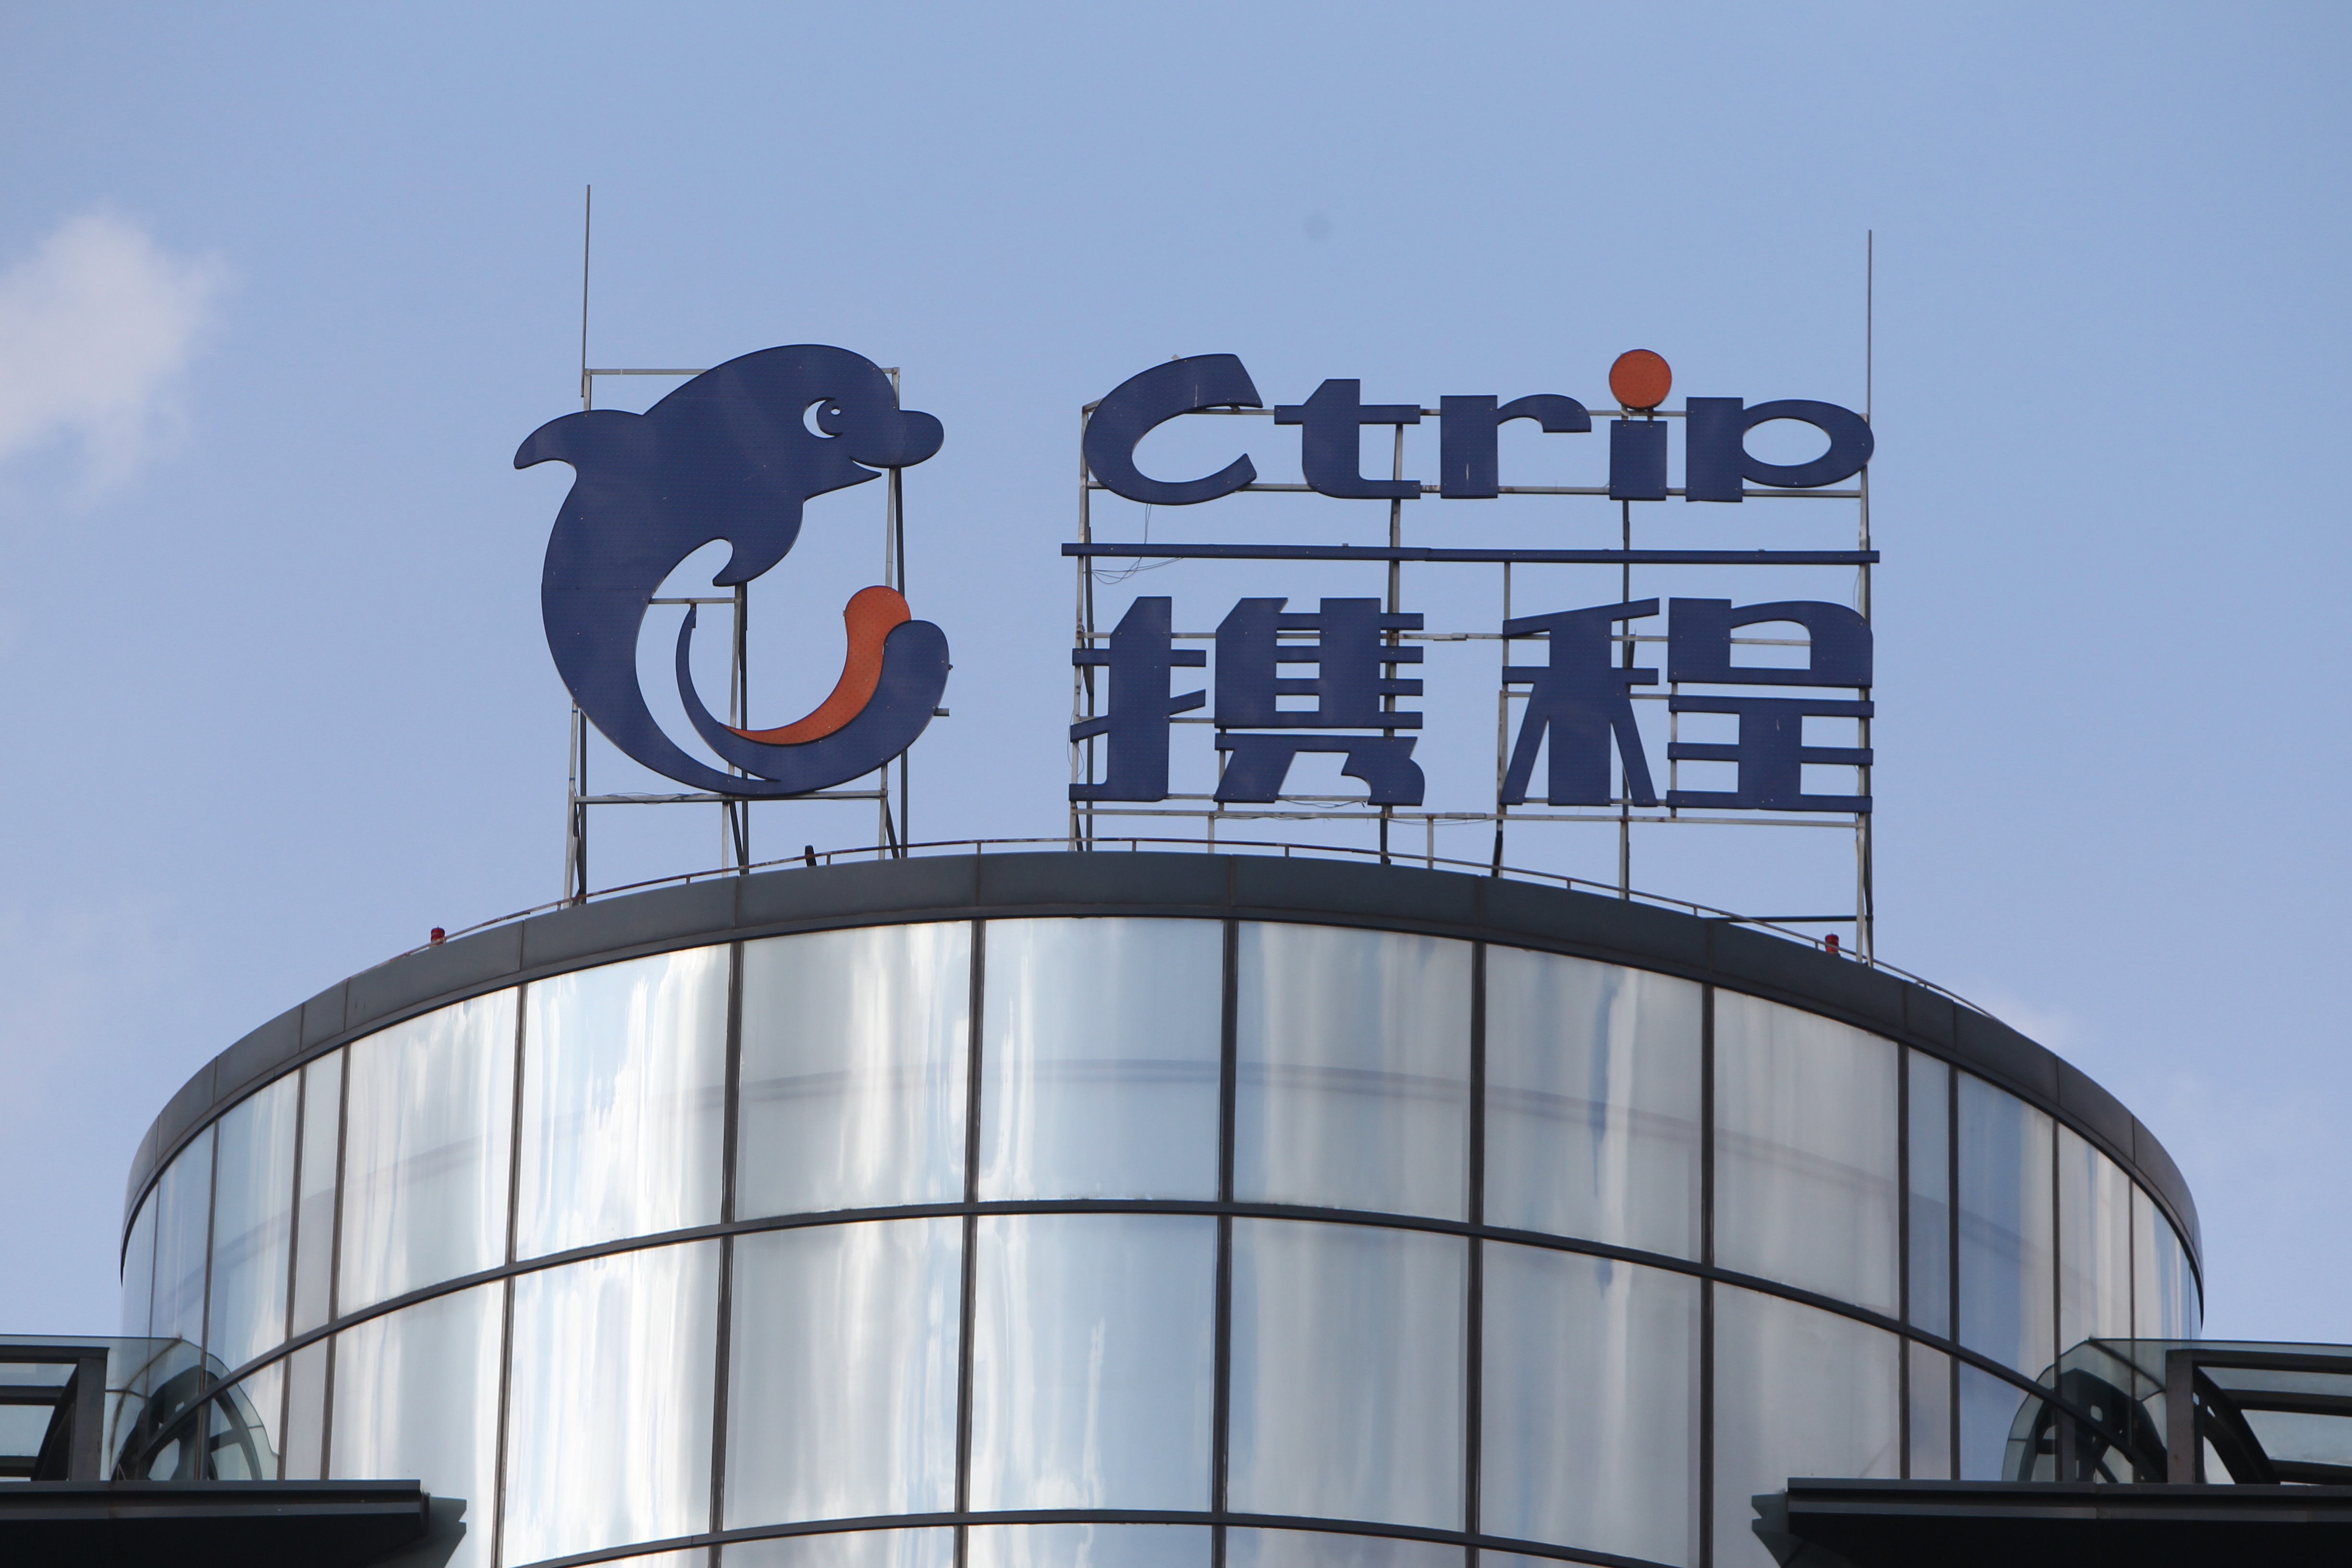 Taking a big slice of the global tourism market and beating competitors like Expedia is now a key focus for Ctrip